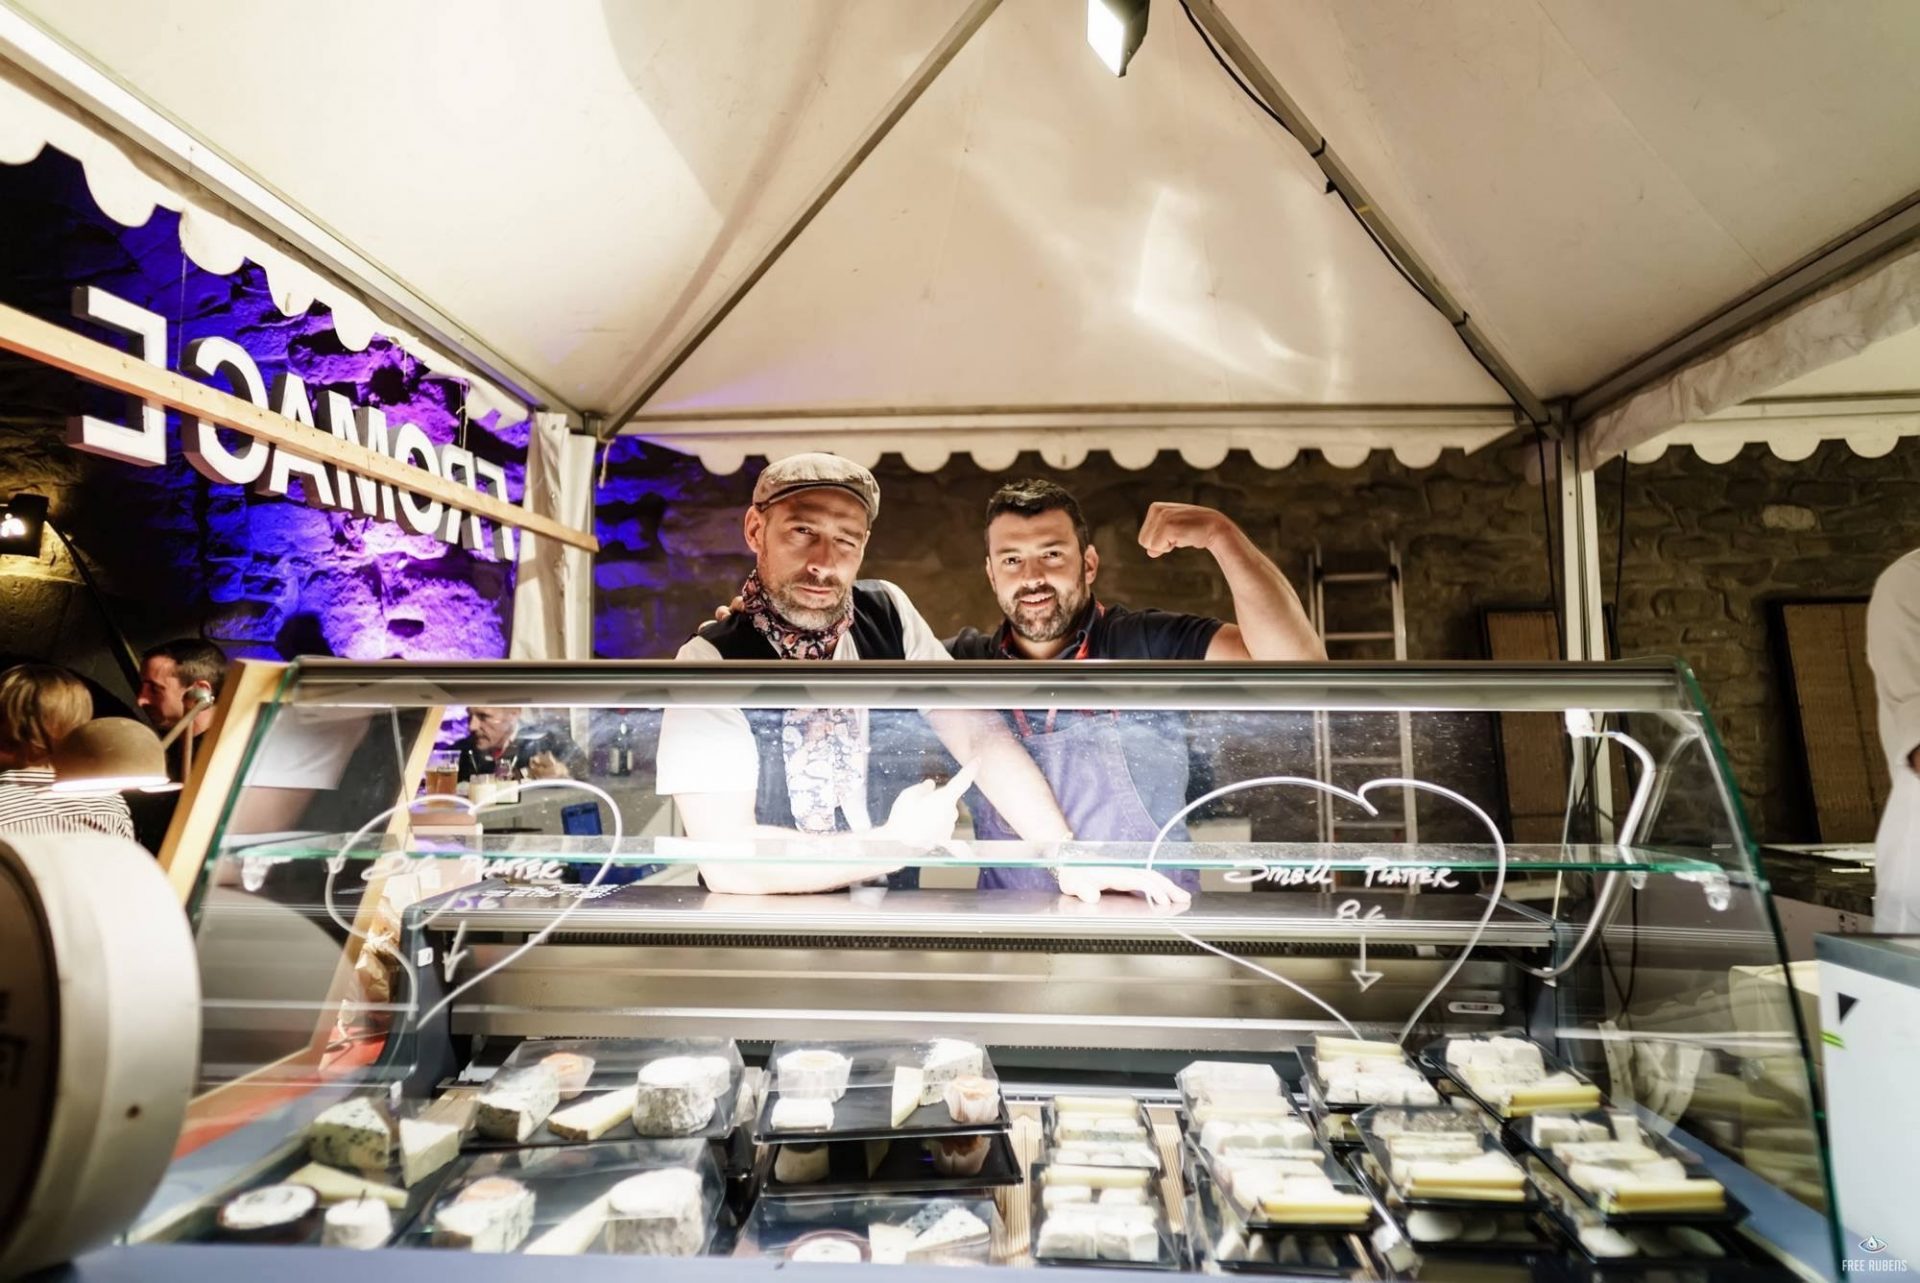 How many music festivals have a fully stocked Fromagerie staffed by two knowledgable affineurs?